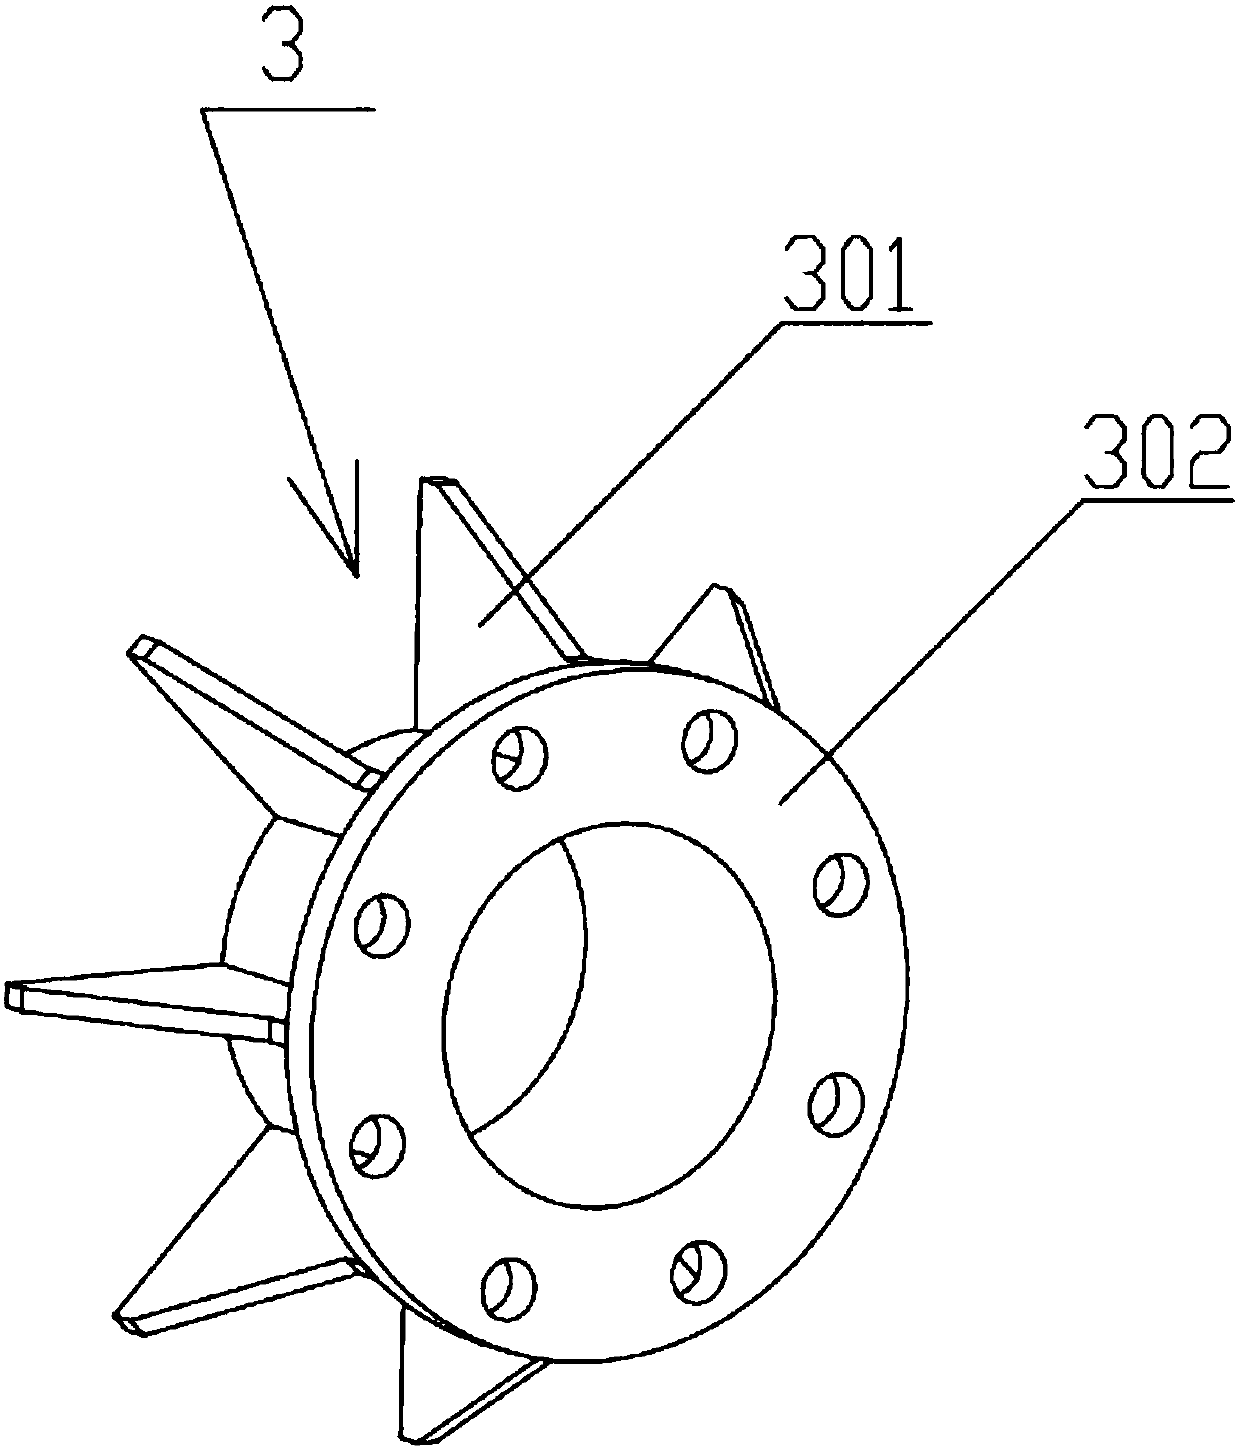 Low noise thrust bearing device for ship